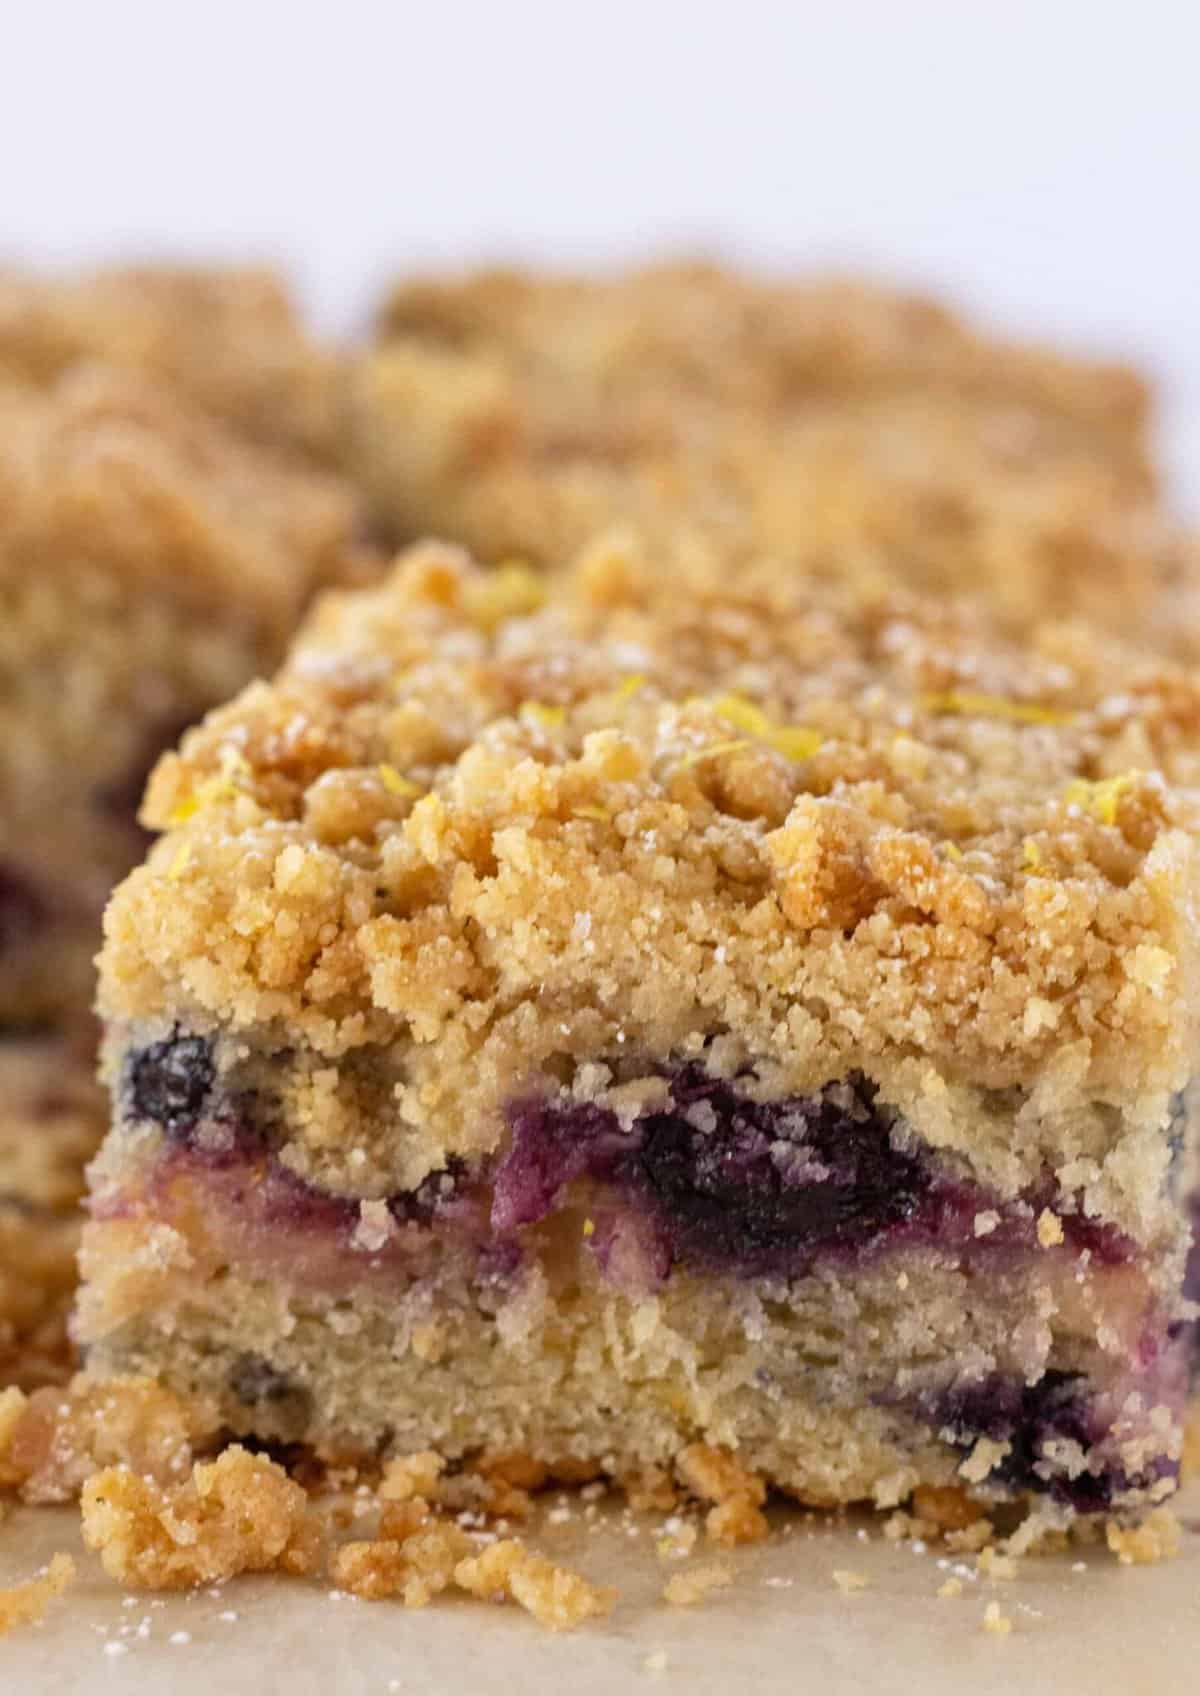 A close-up view of an easy lemon blueberry crumb cake.